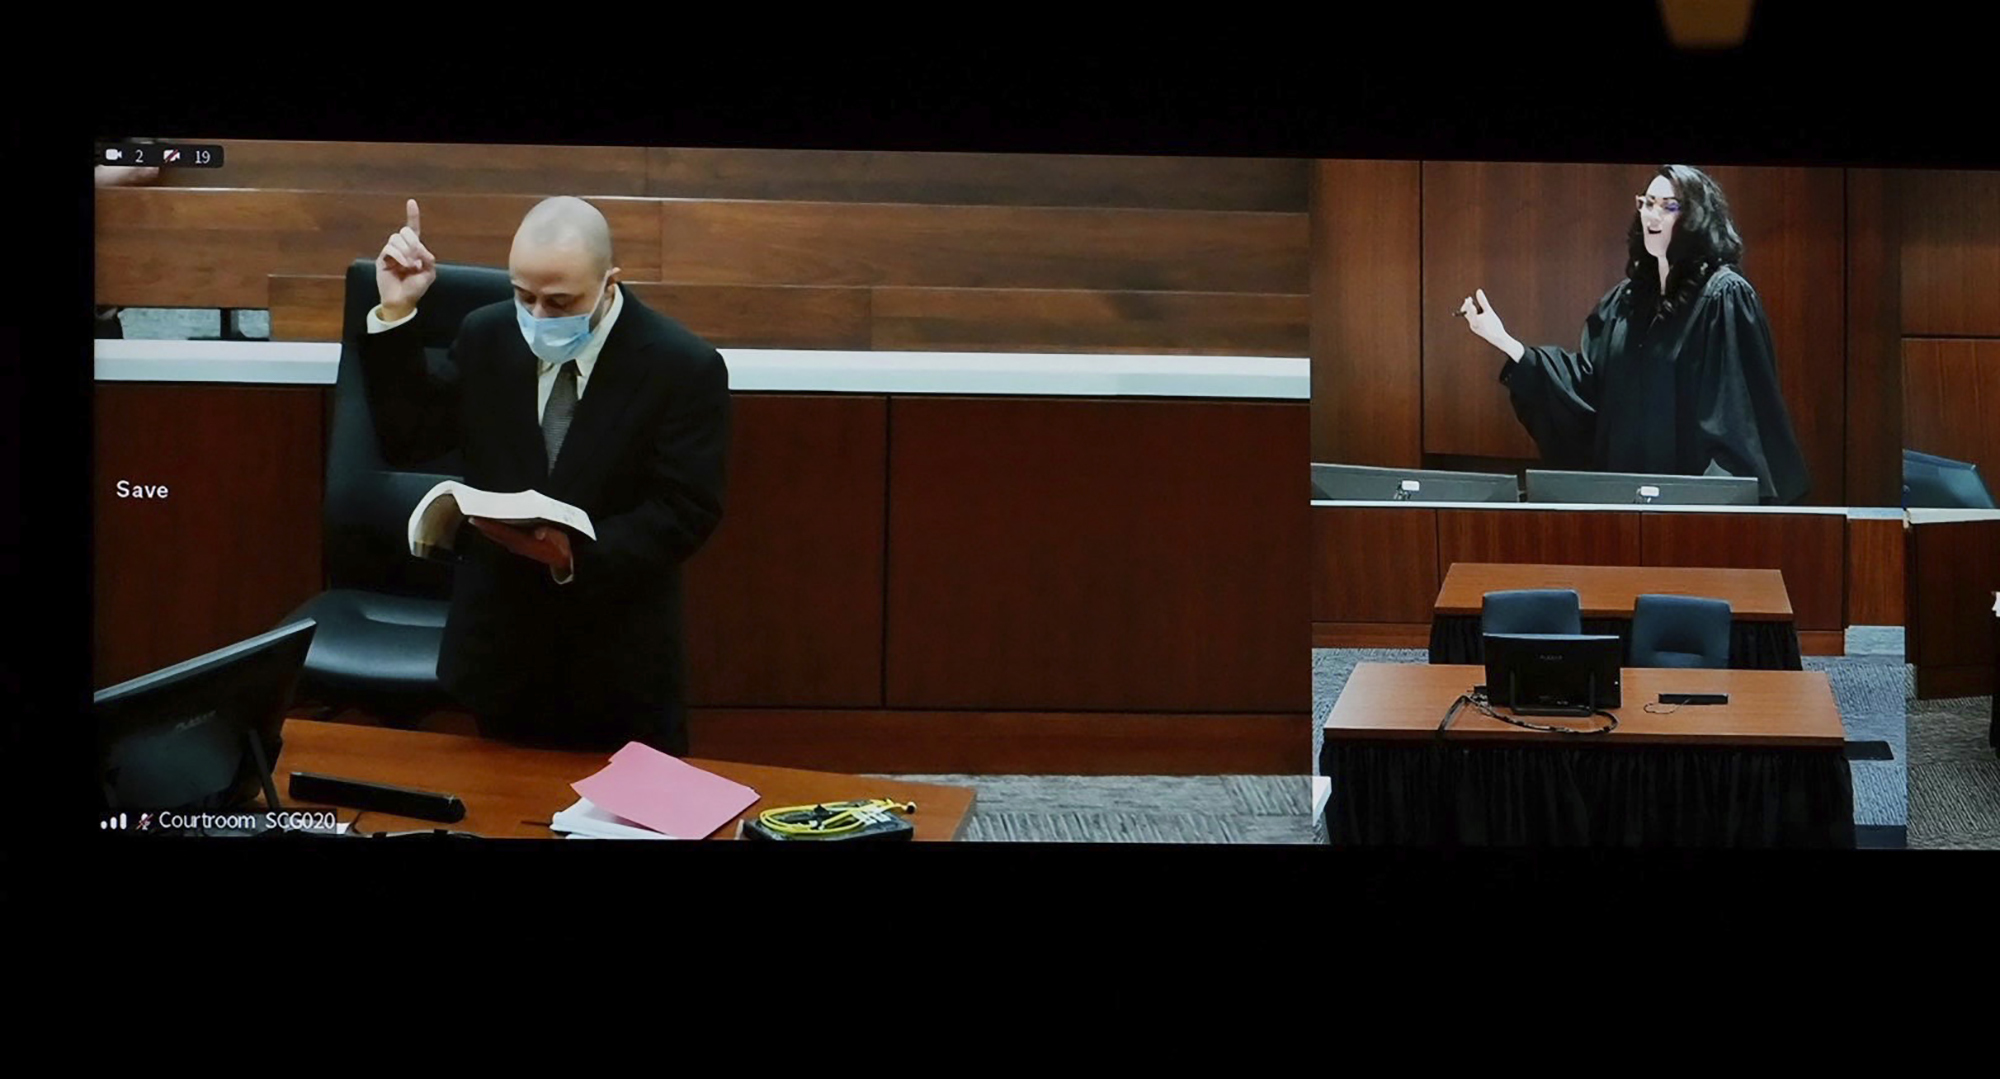 Darrell Brooks reads from the Bible during jury selection in his trial